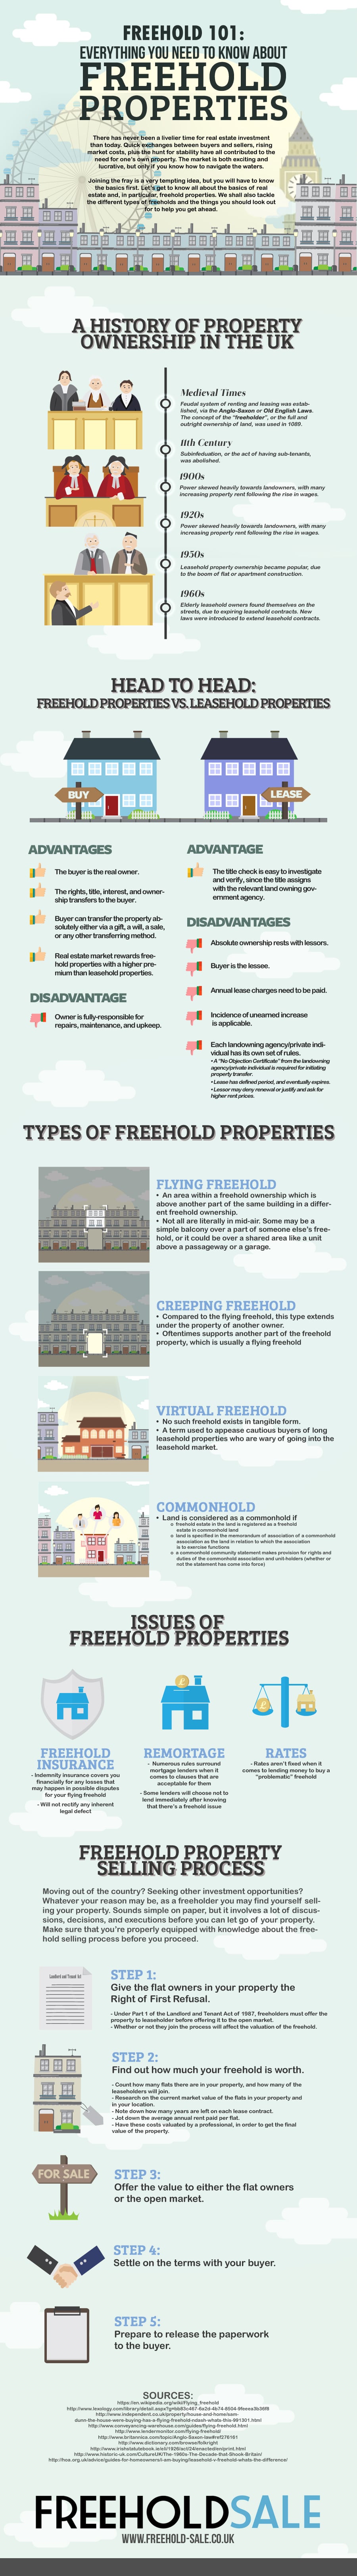 Freehold 101: Everything You Need To Know About Freehold Properties [INFOGRAPHIC]